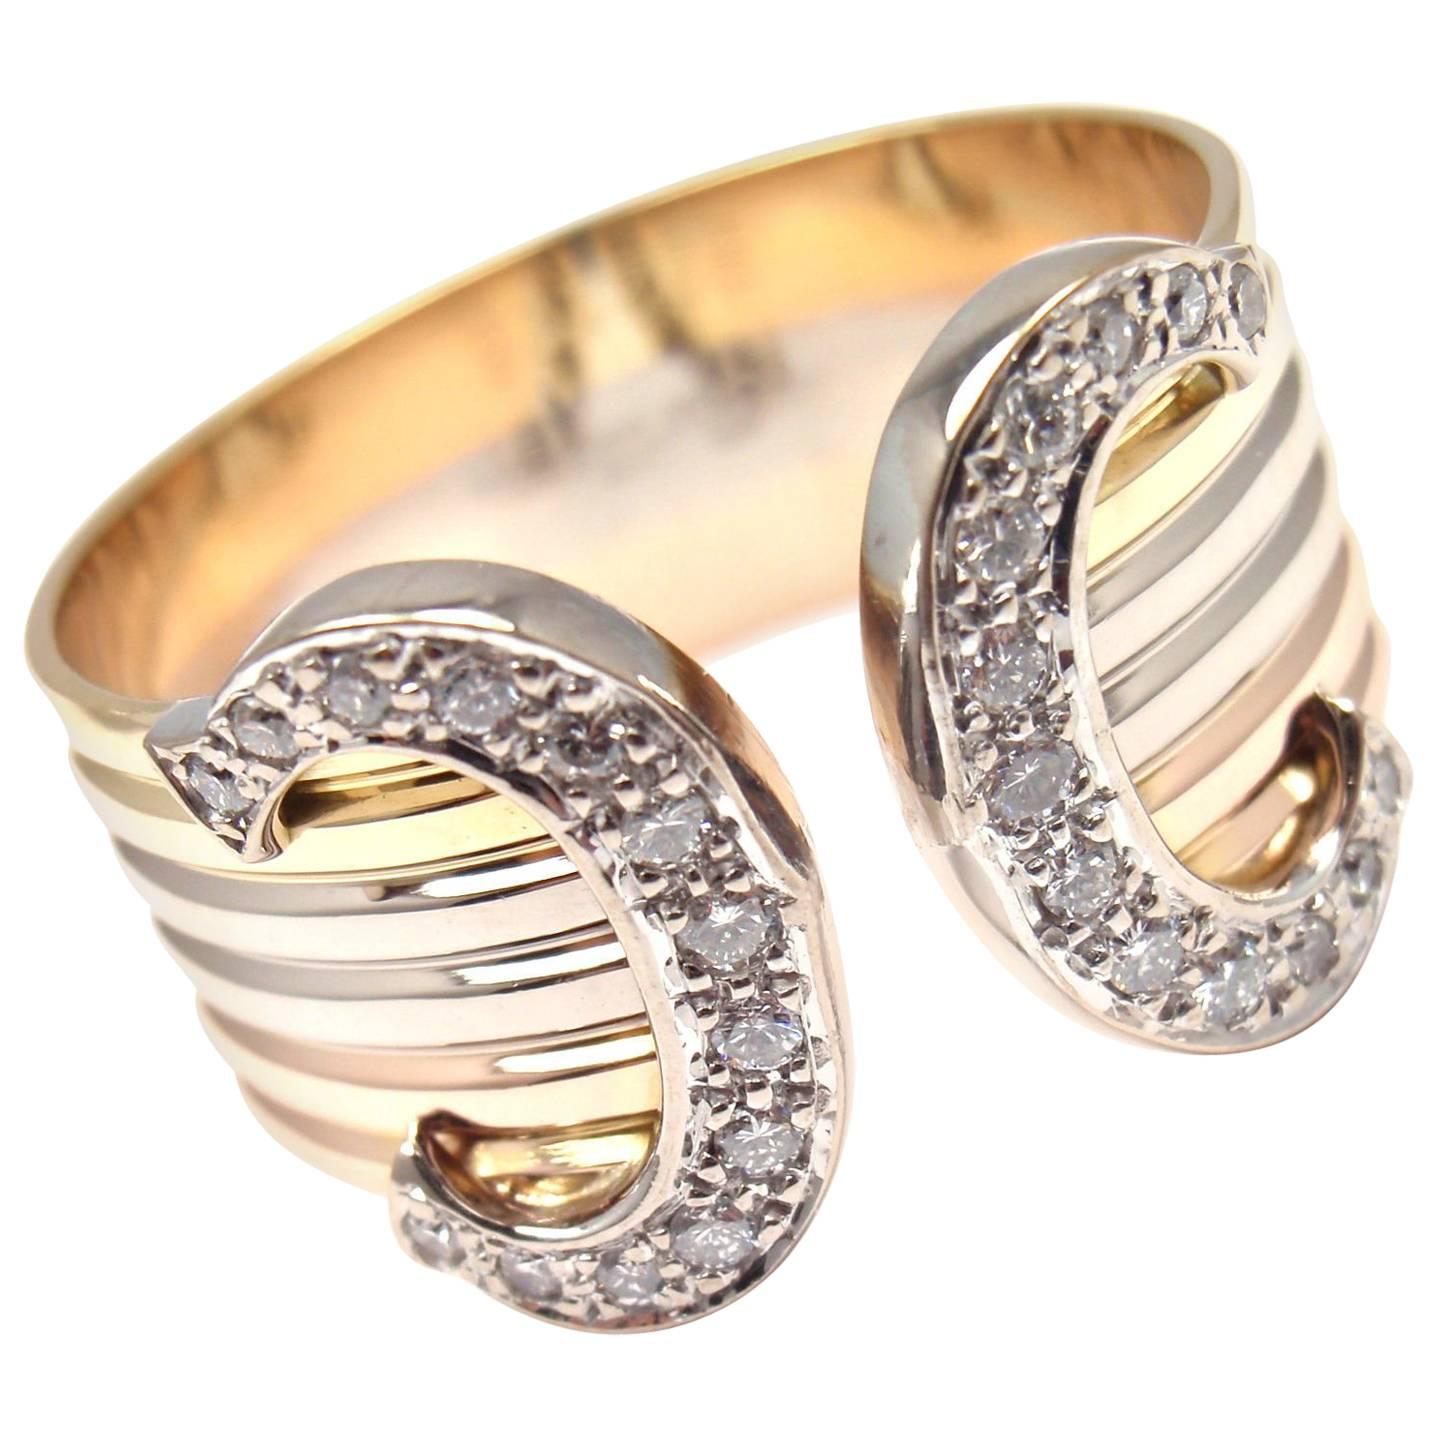 Cartier Double C Diamond Tricolor Gold Band Ring